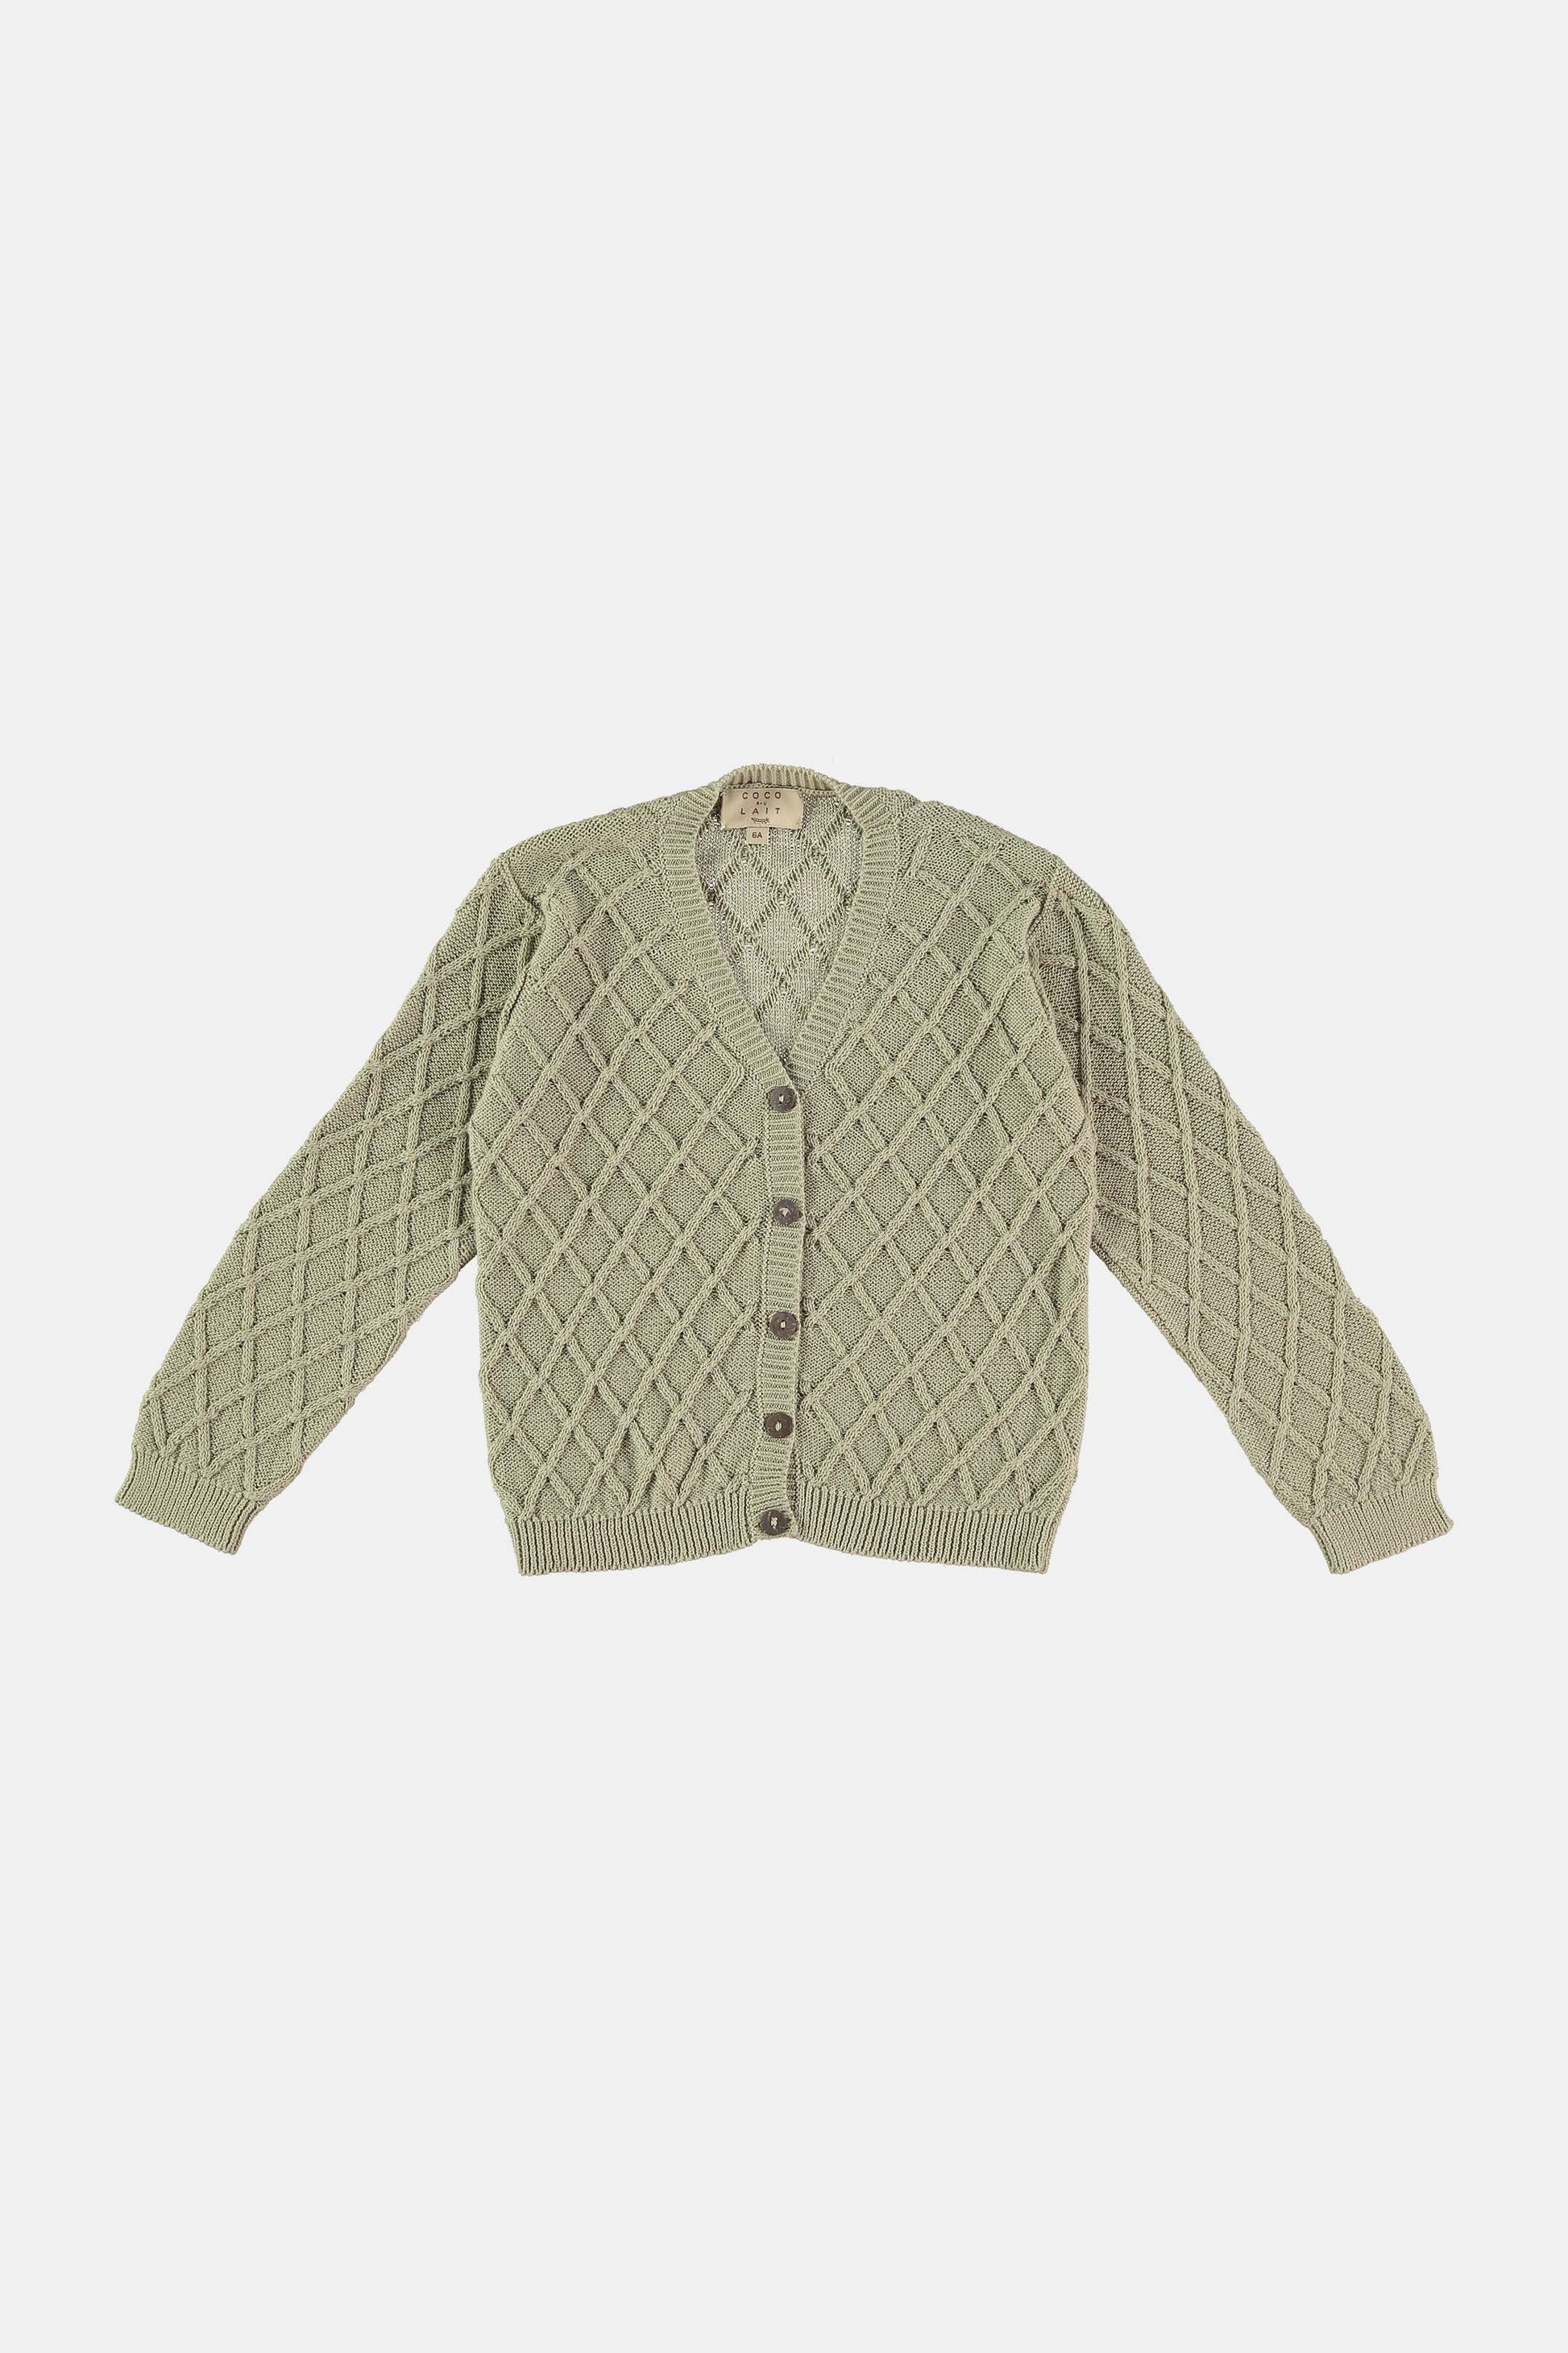 Coco Au Lait GREEN AVEN KNITTED CARDIGAN Jacket Alfalfa